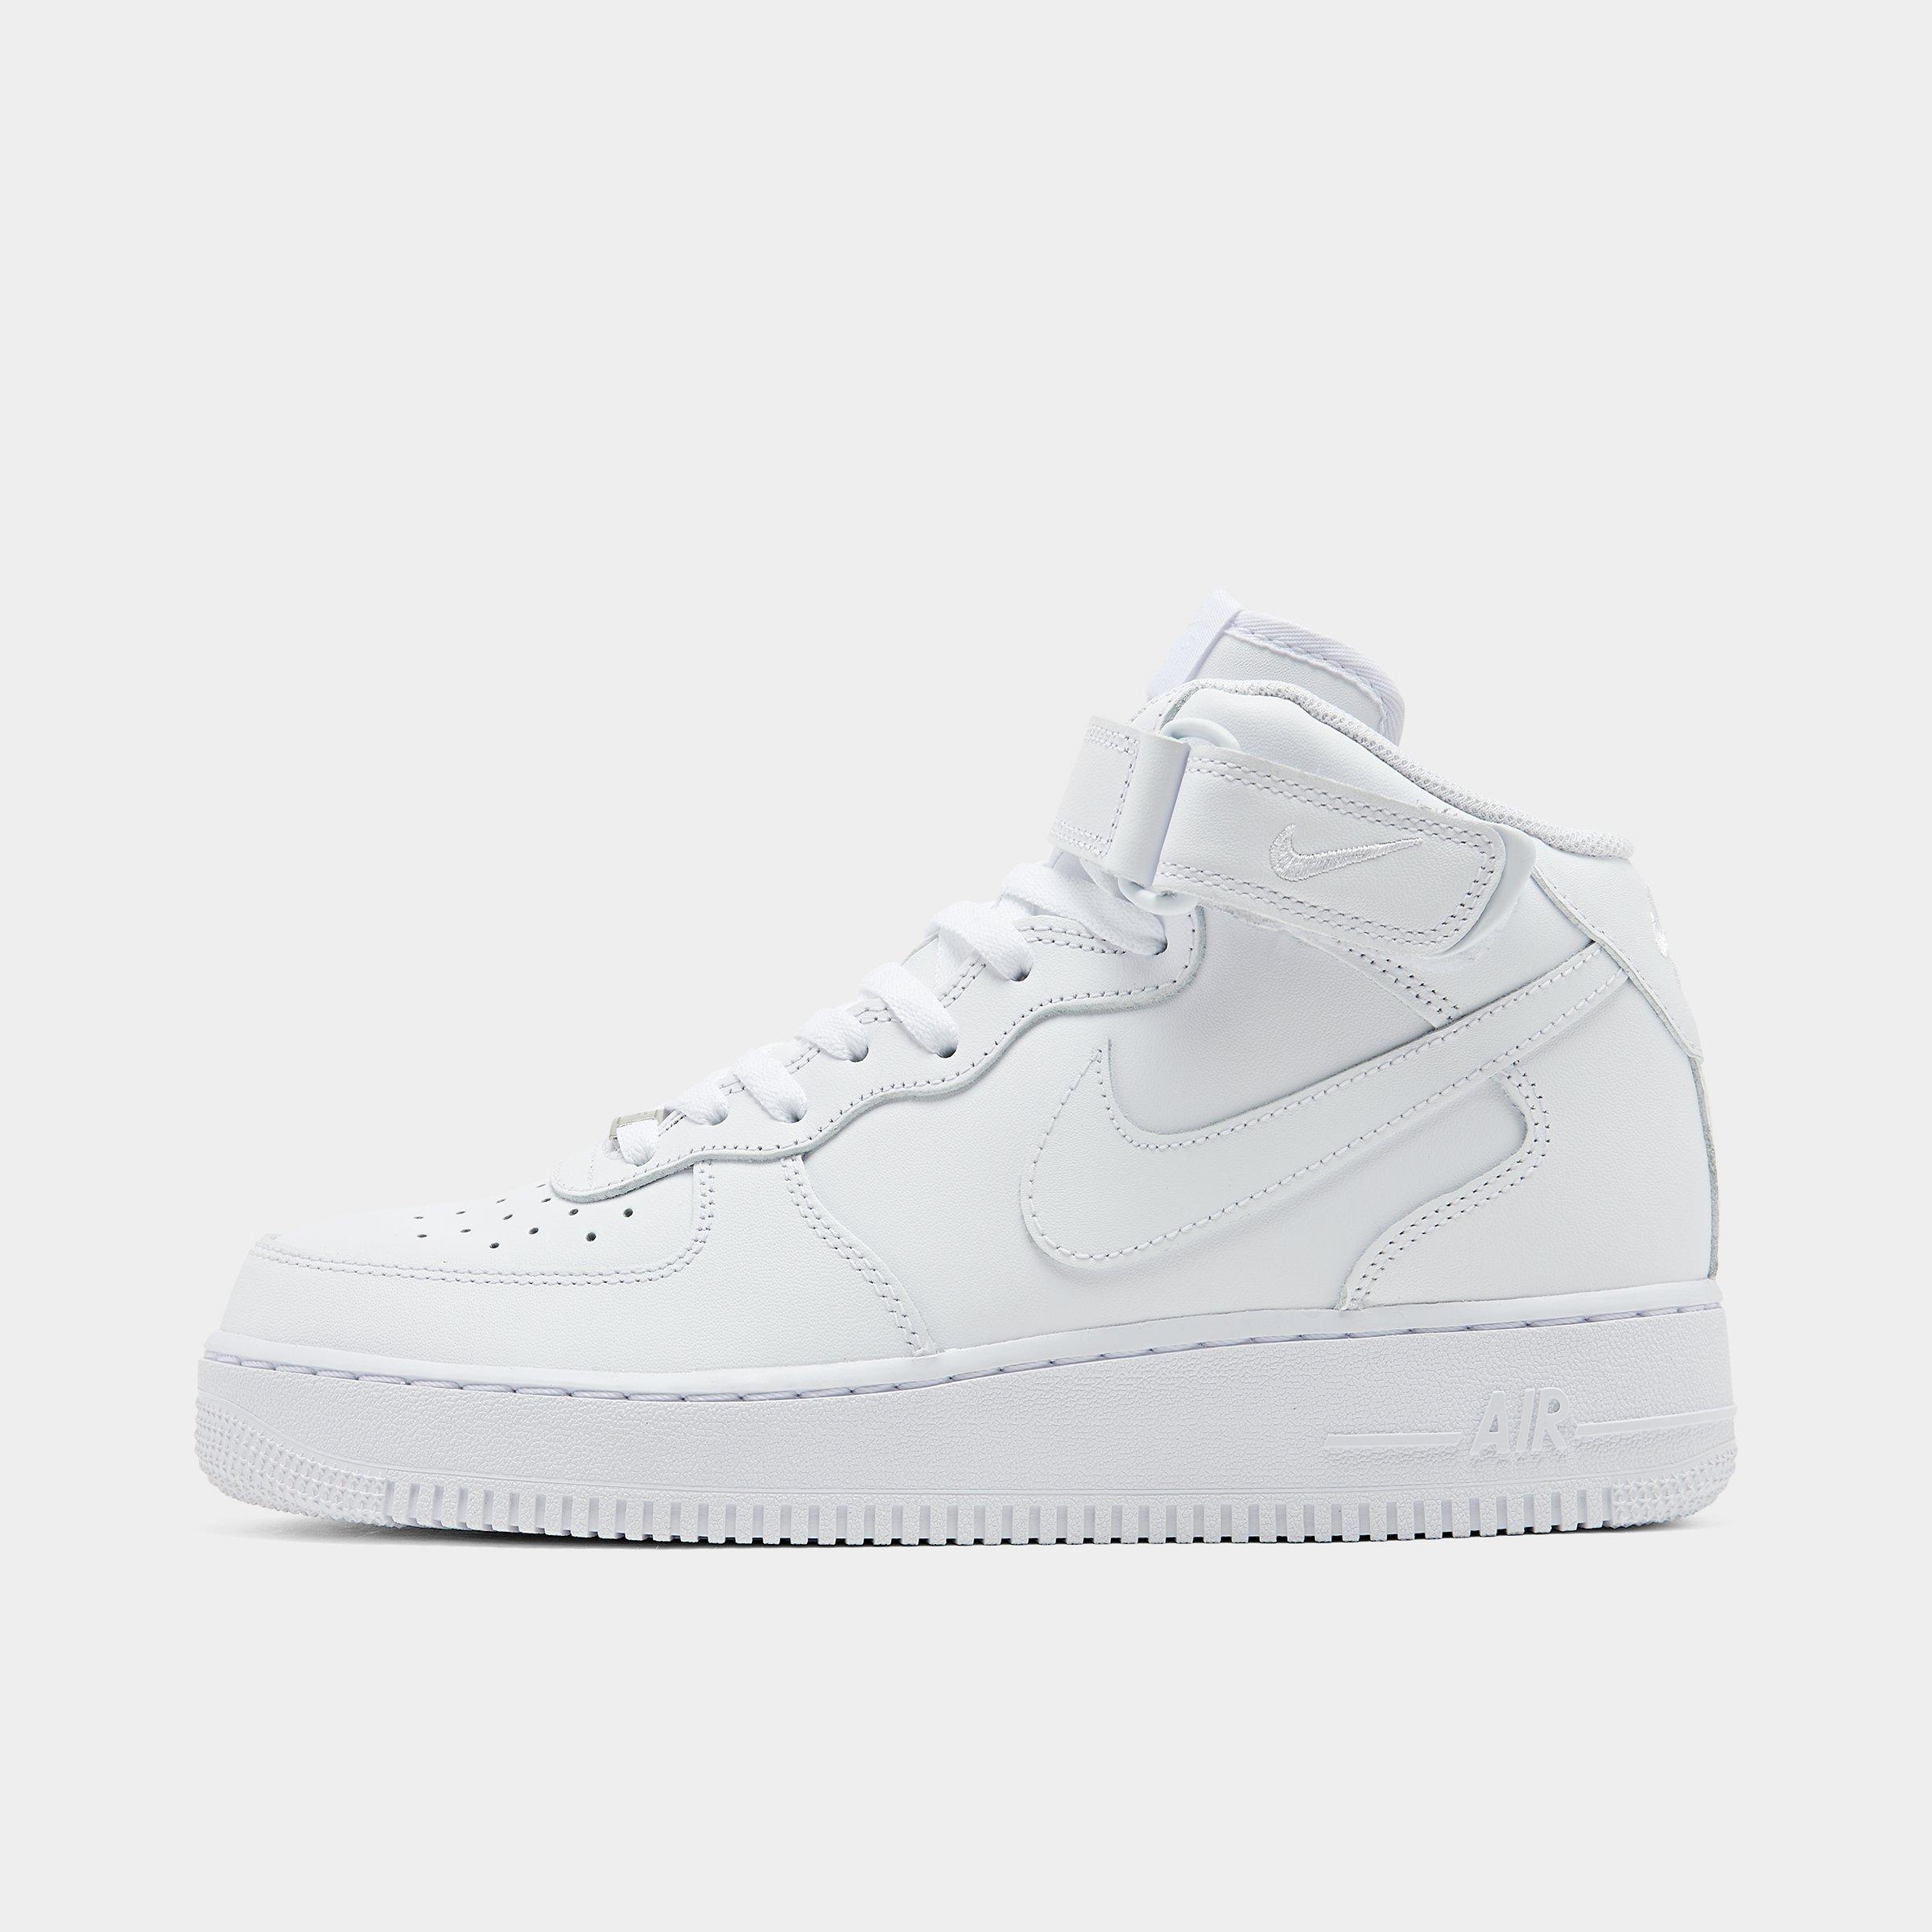 Men's Nike Air Force 1 Mid Casual Shoes| JD Sports